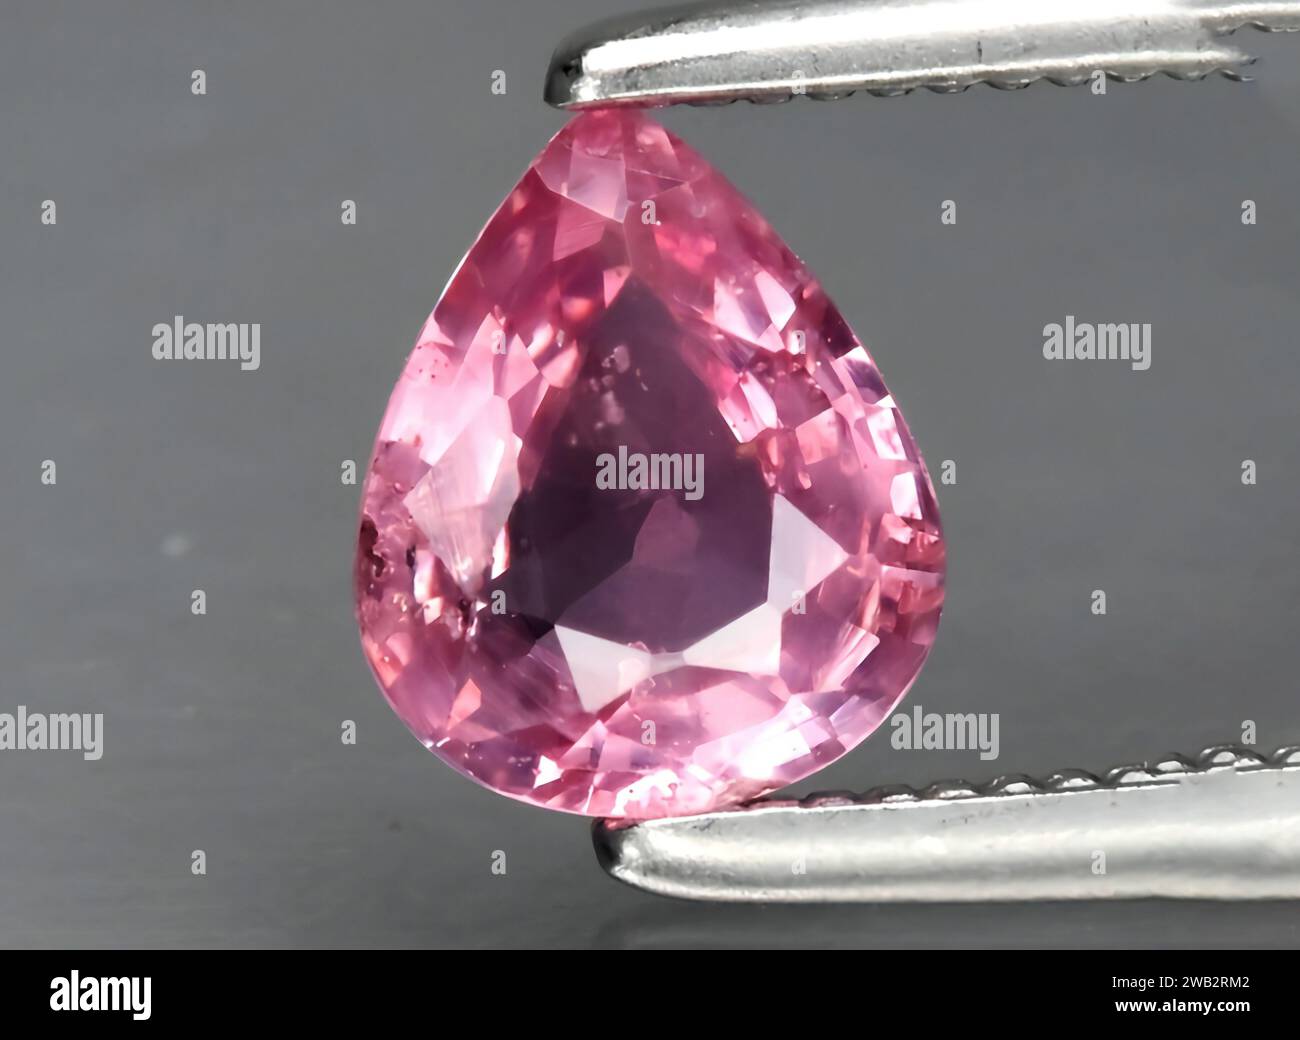 Natural pink sapphire gem on background Stock Photo